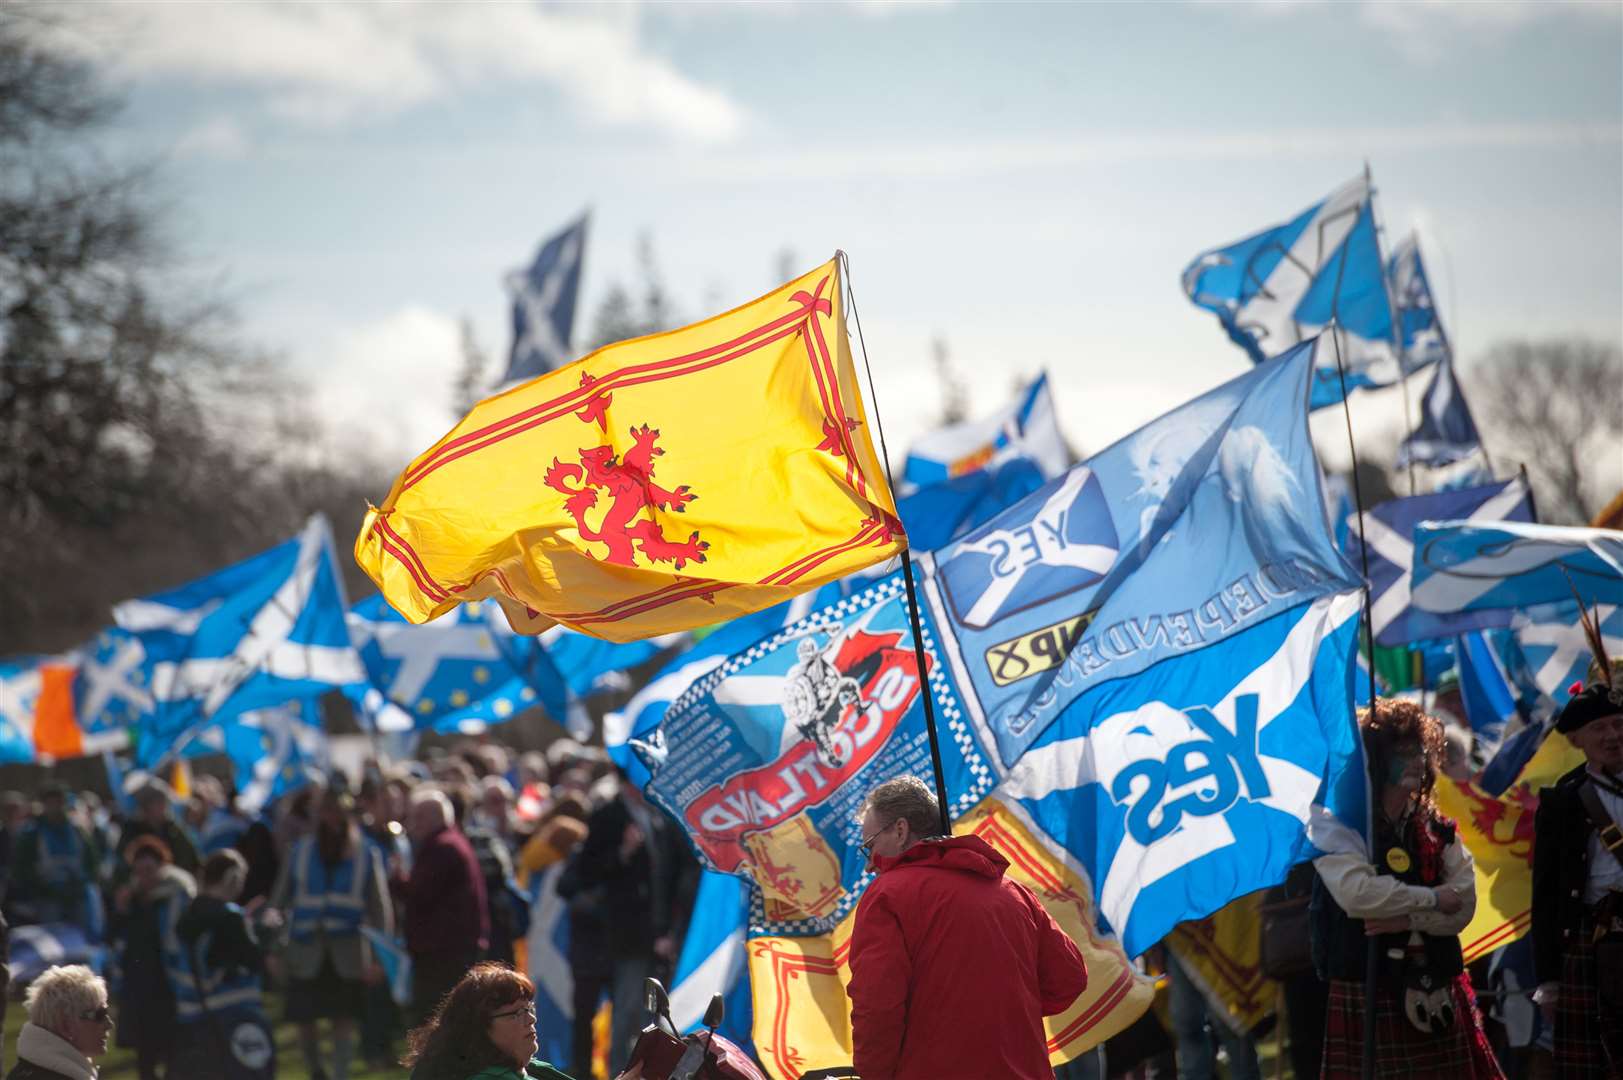 Independence supporters on a previous march through Inverness. Picture: Callum Mackay